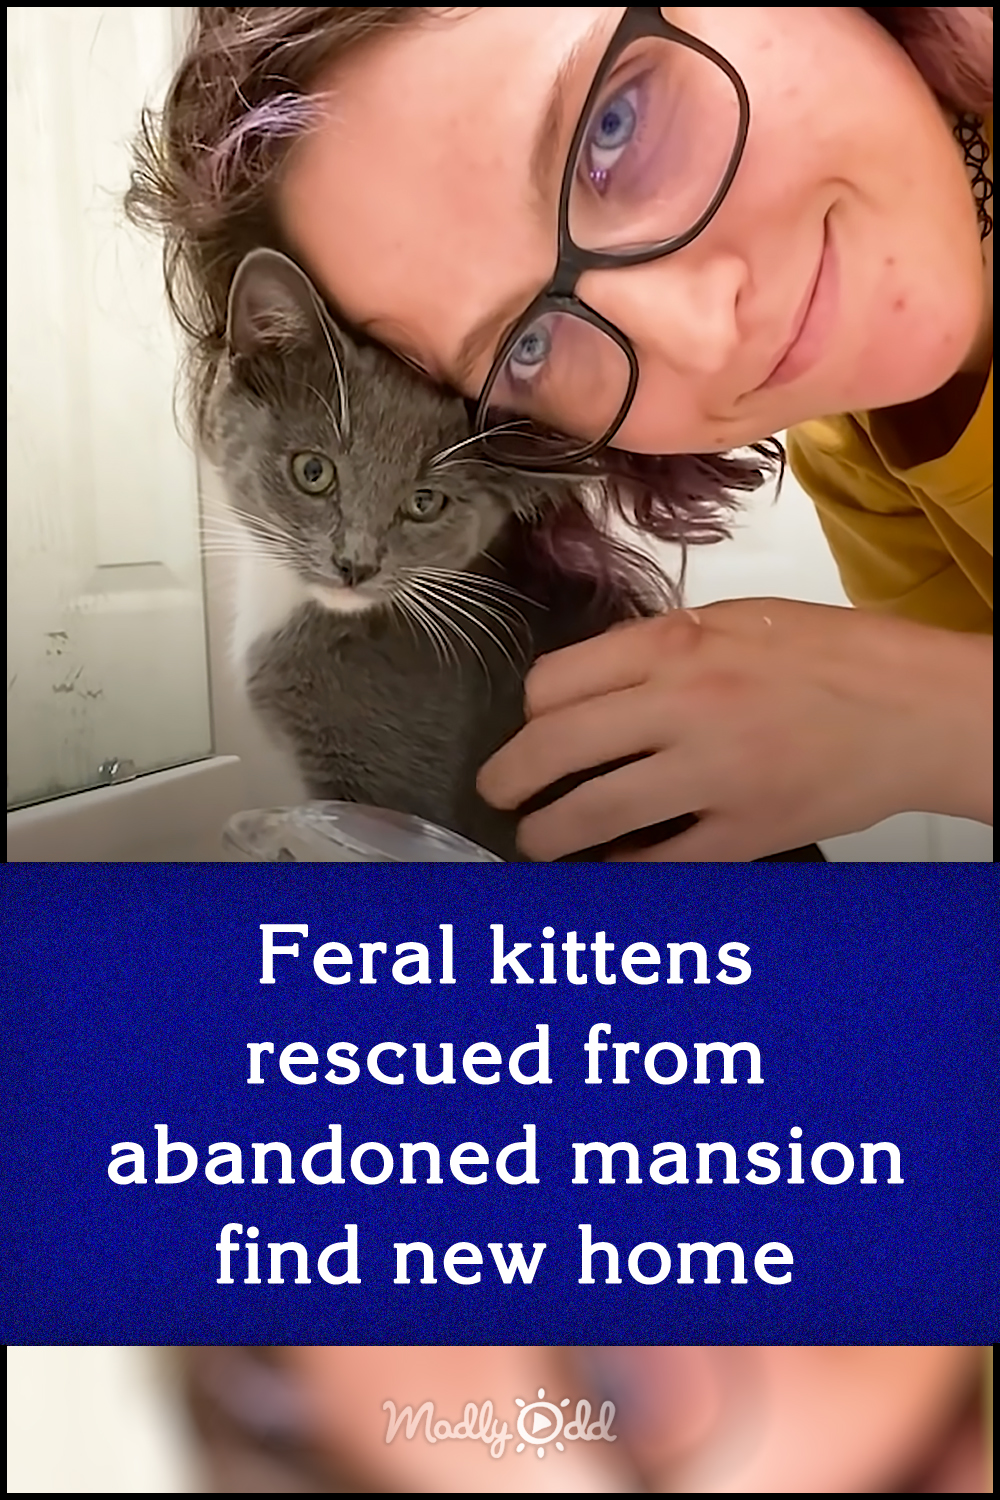 Feral kittens rescued from abandoned mansion find new home